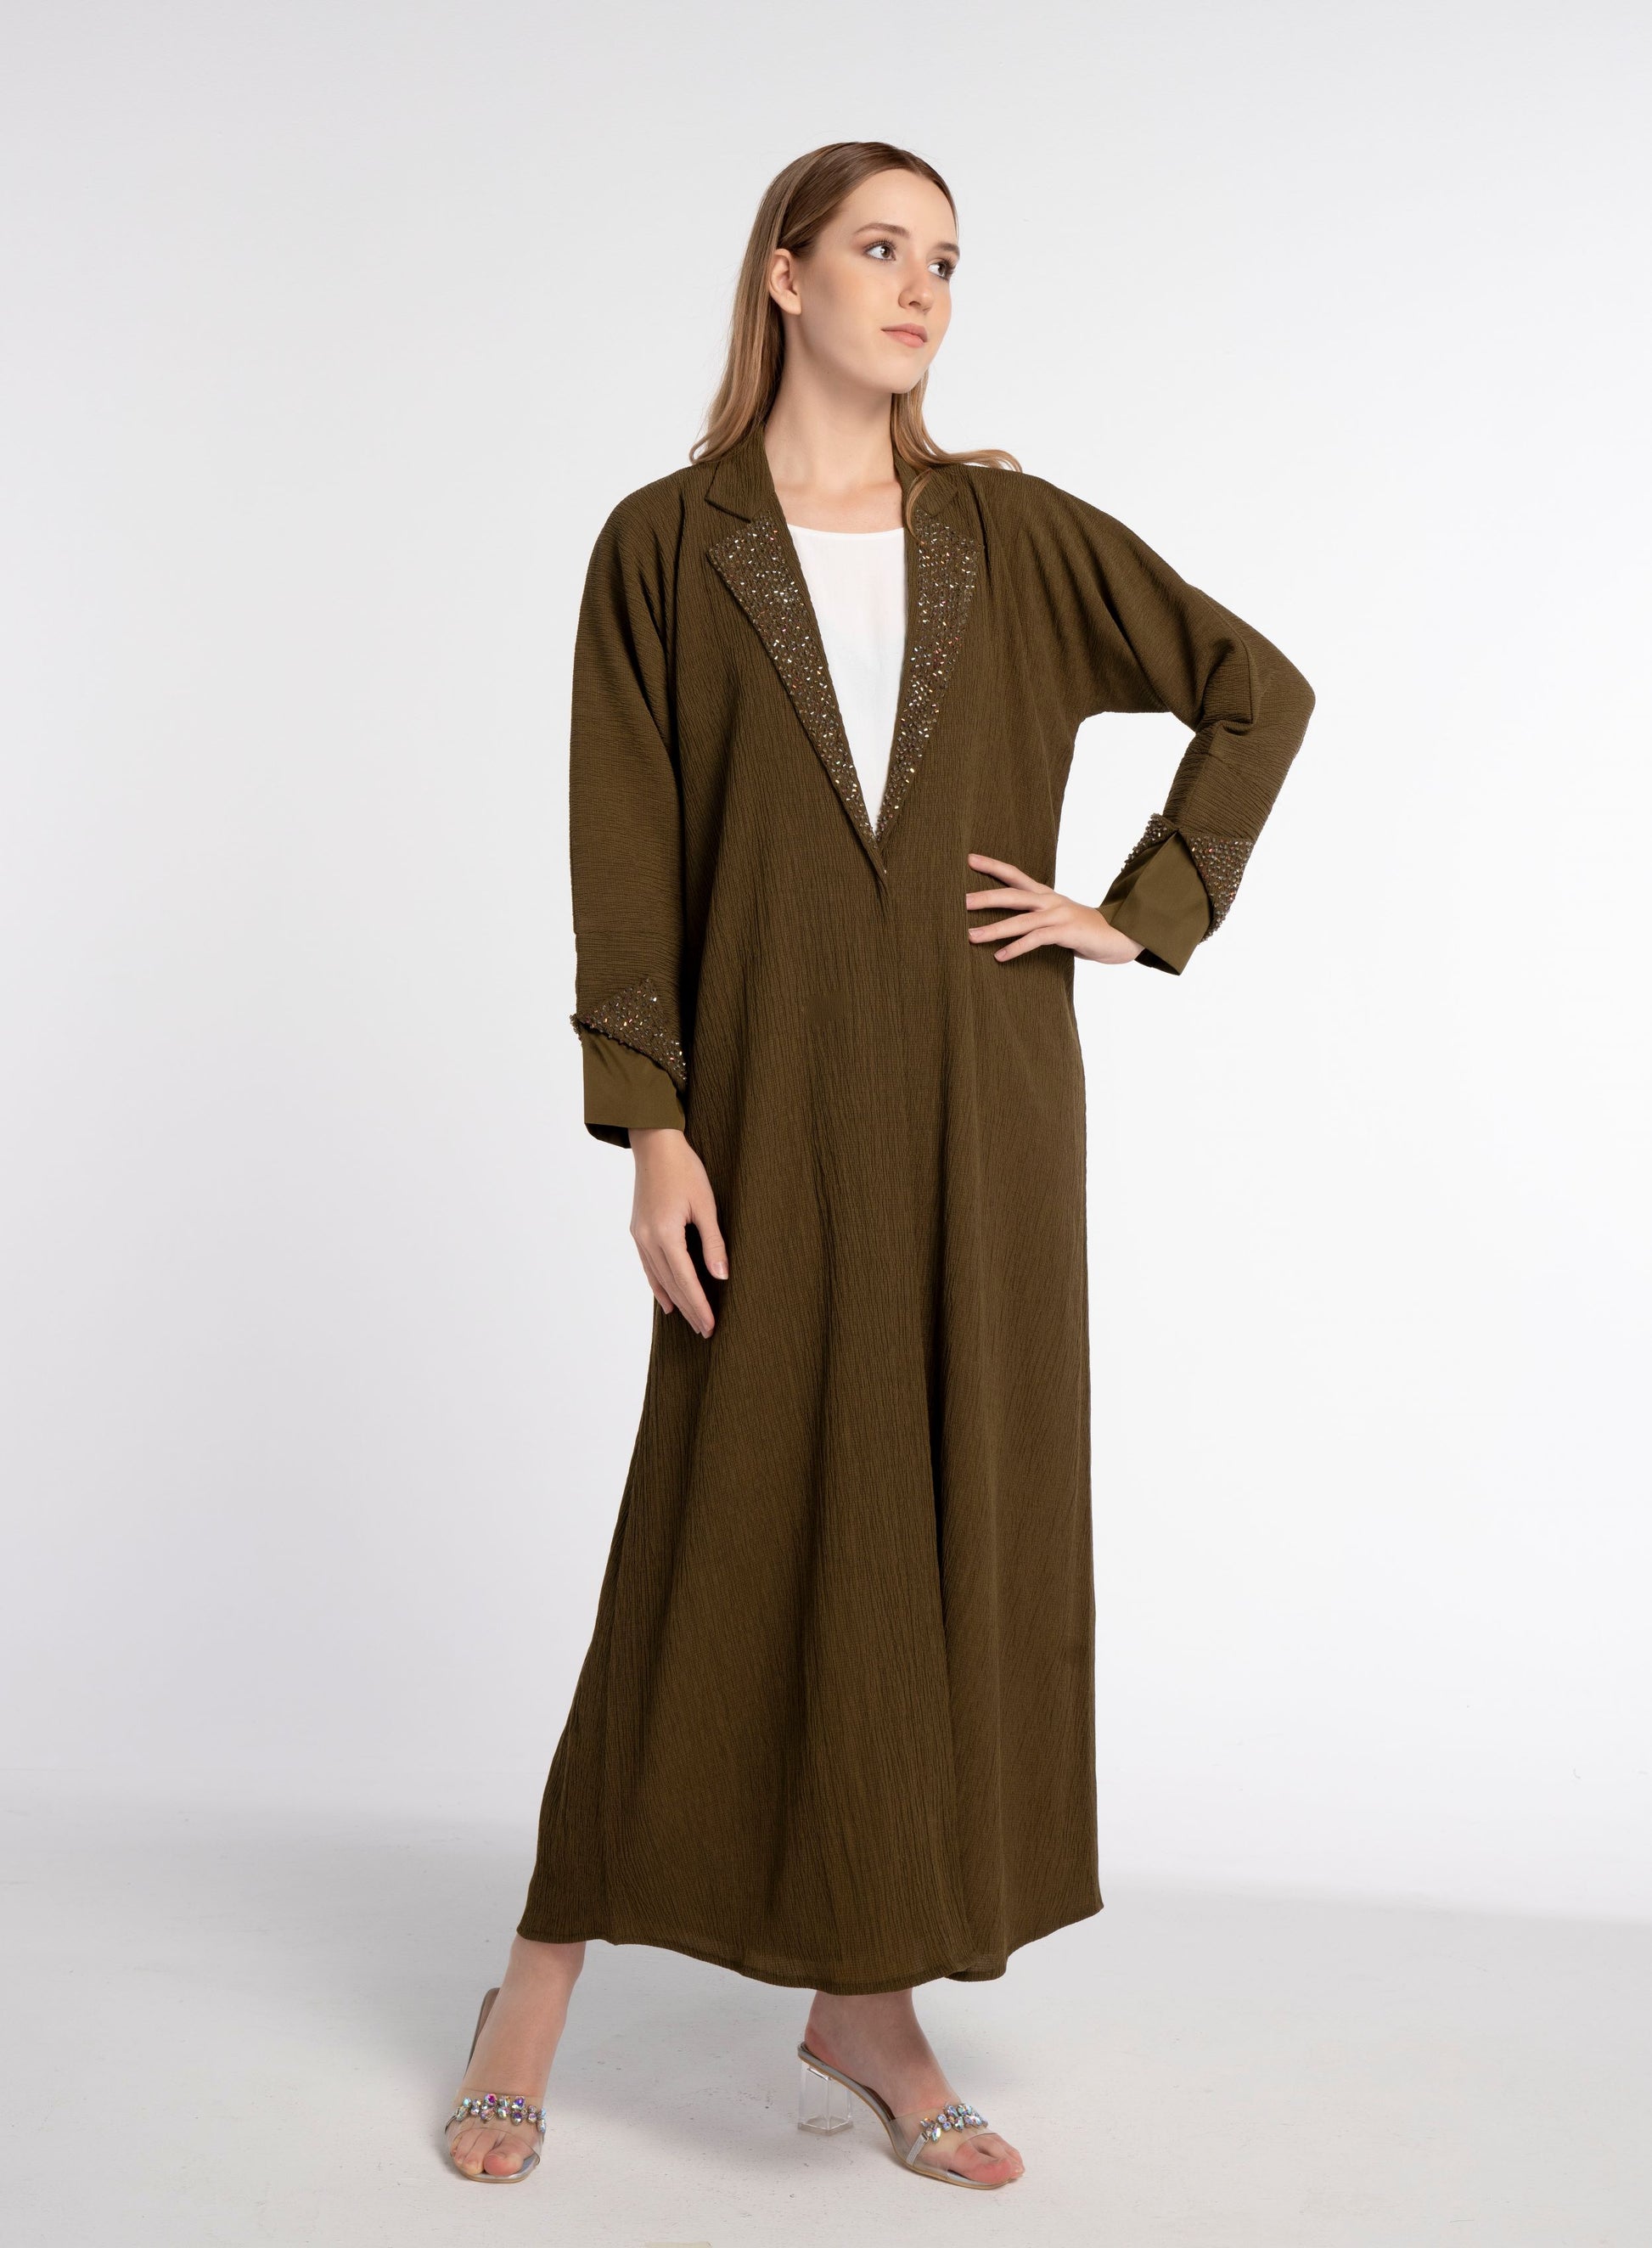 Green colored abaya with embellishments